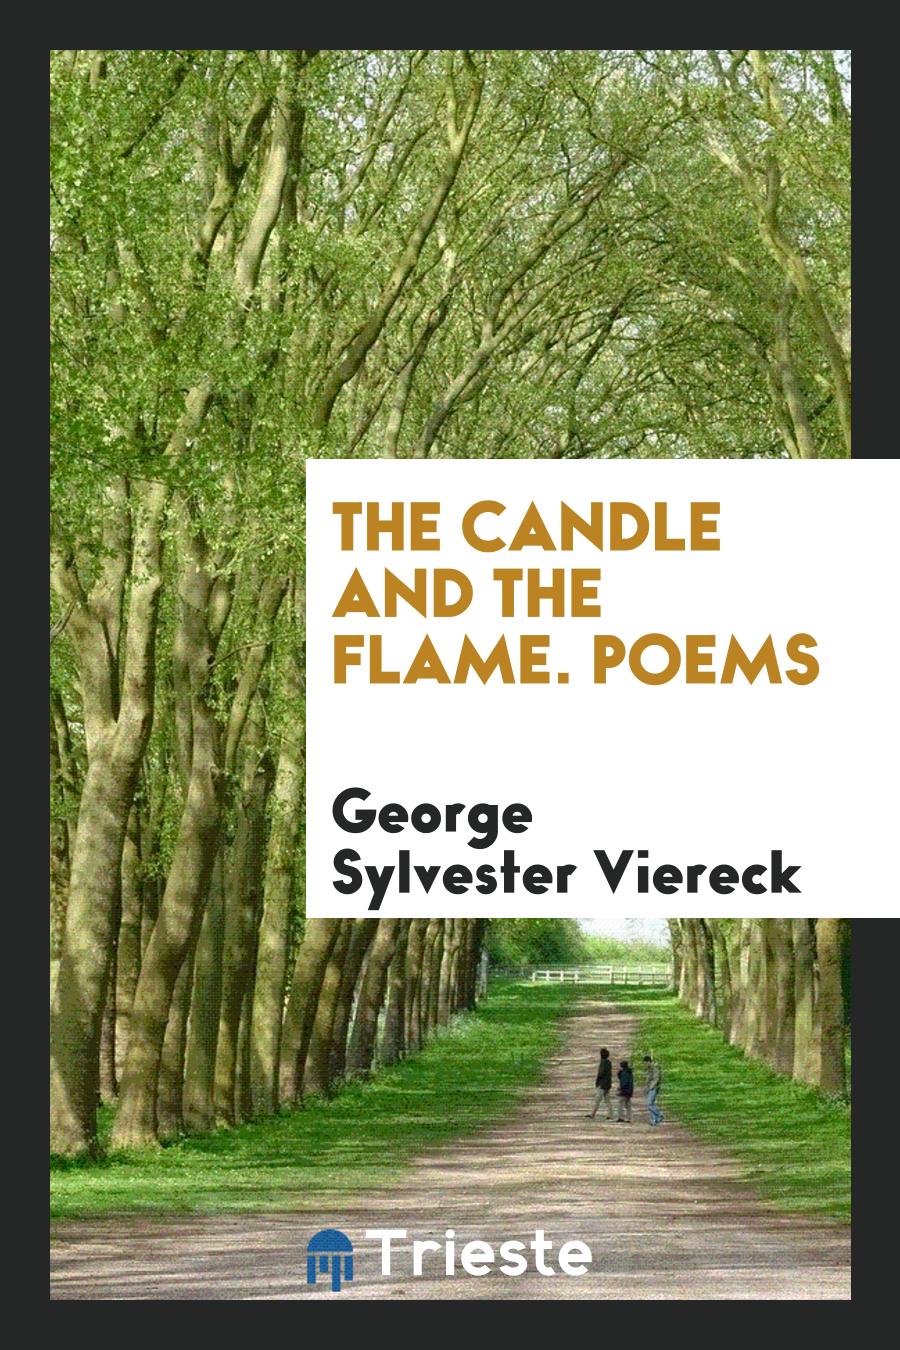 The Candle and the Flame. Poems